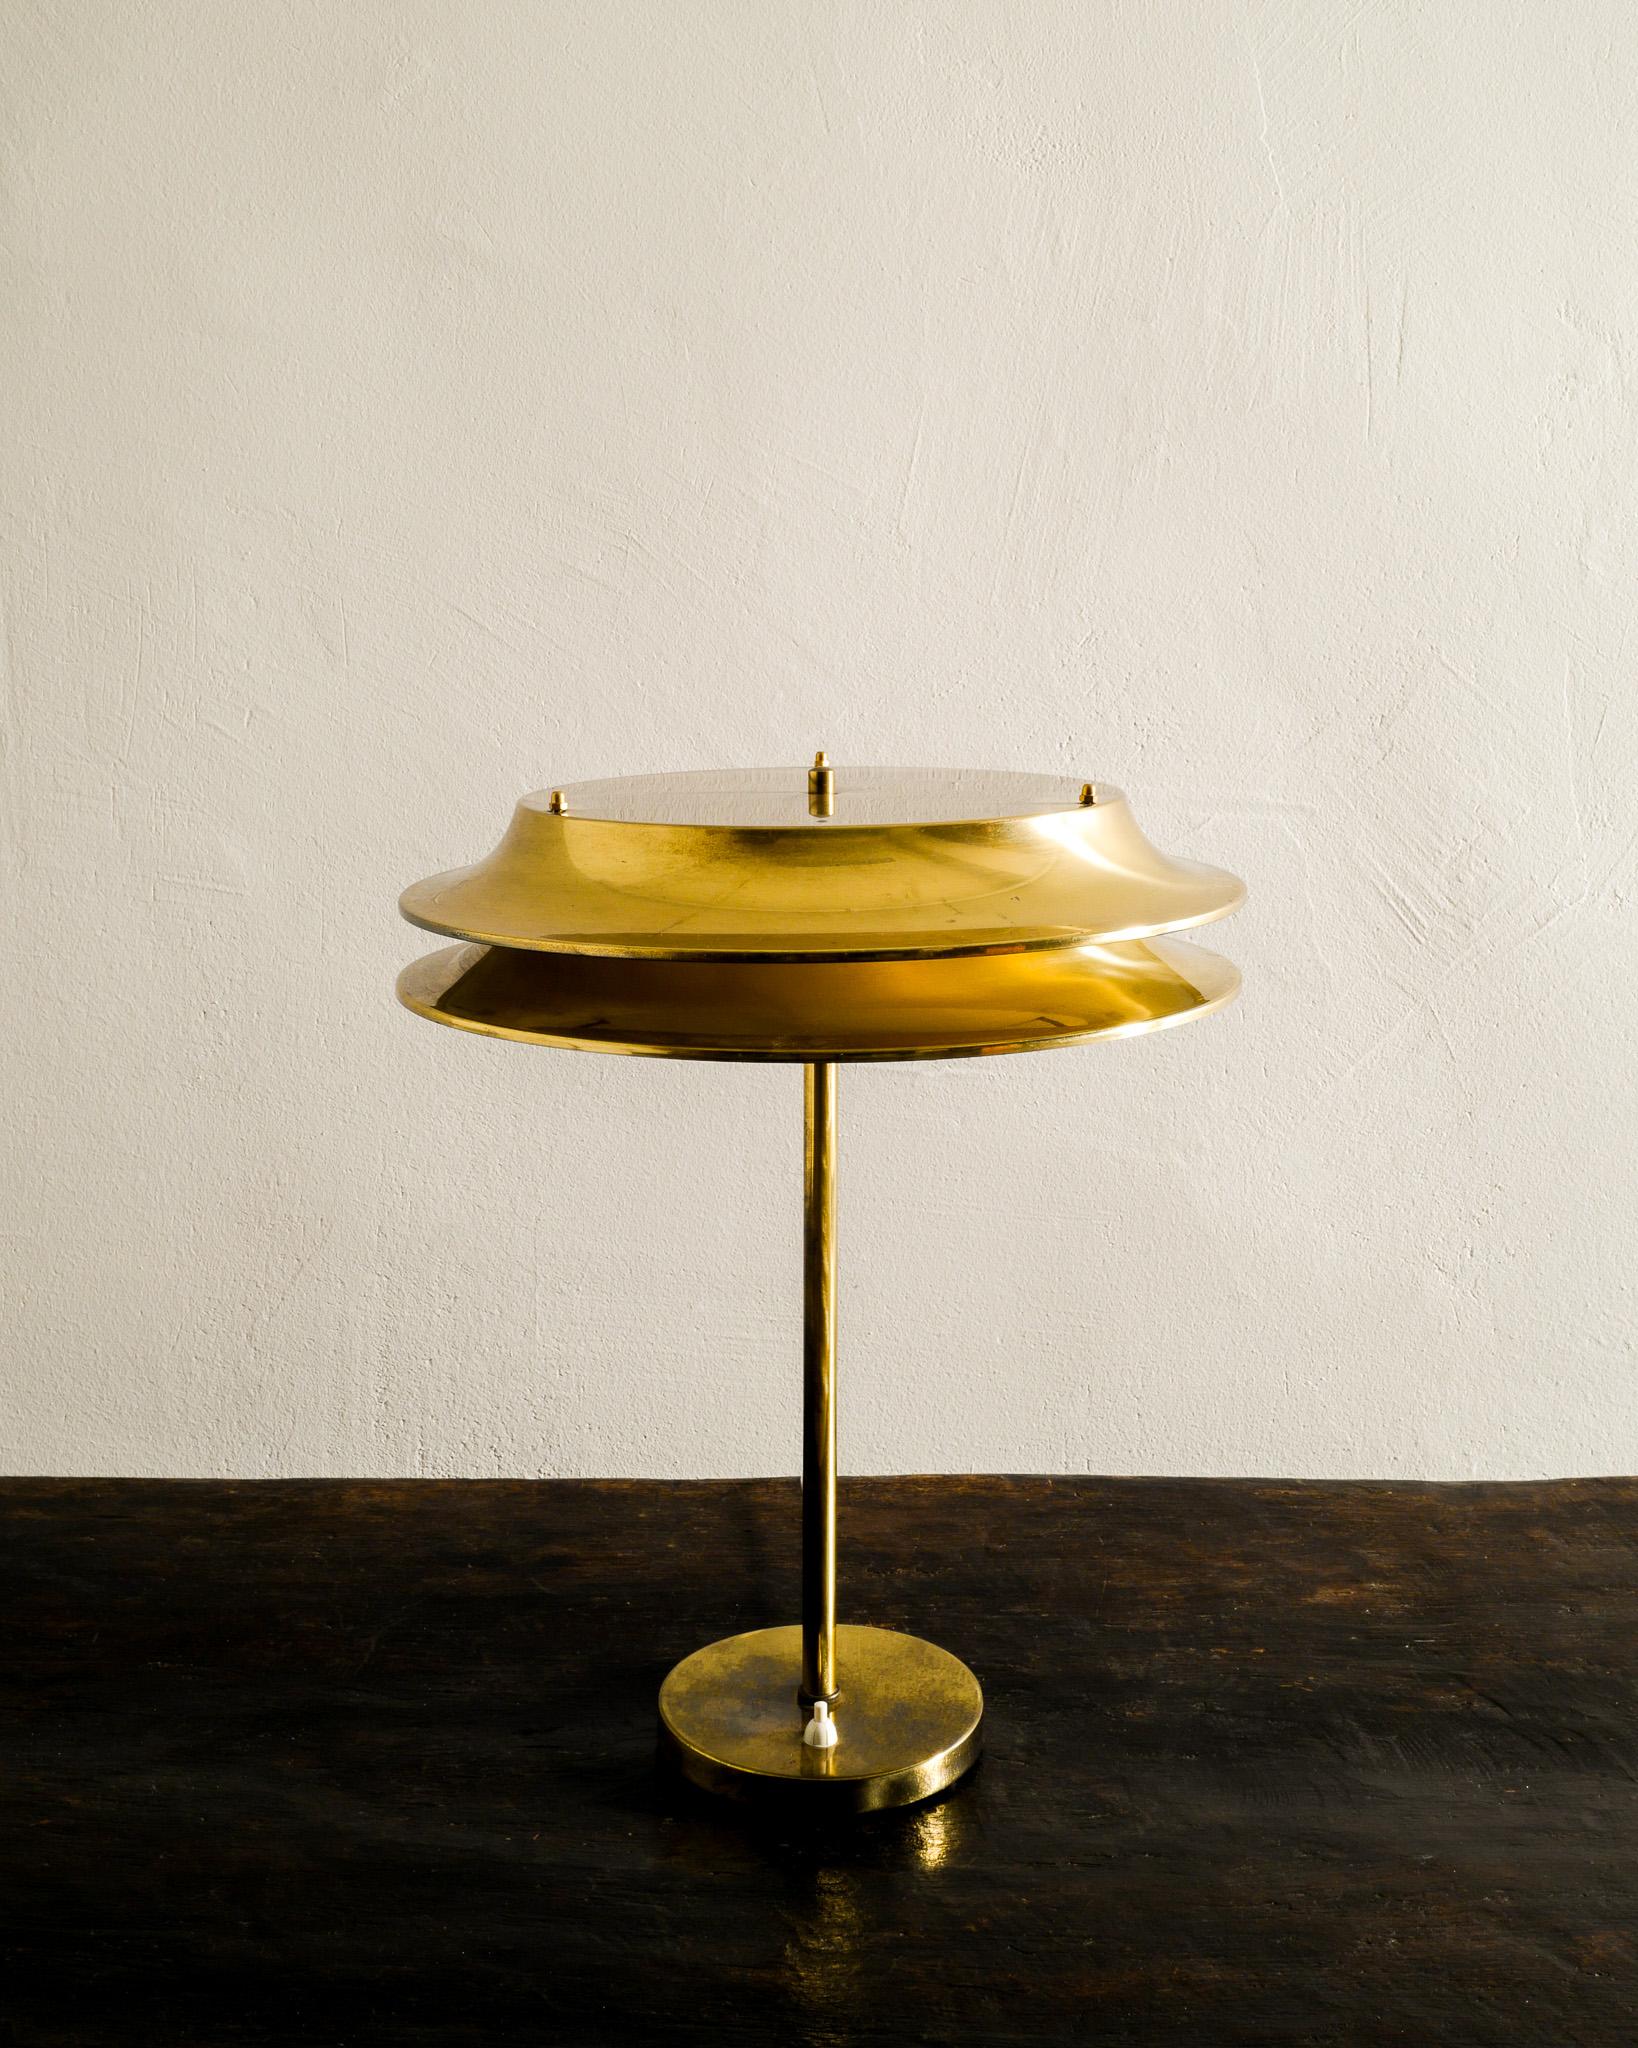 Rare mid century and Scandinavian modern table / desk lamp by Kai Ruokonen and produced by Lynx, Finland 1960s. In good original condition with patina from age and use. Stamped Lynx at the inside of the shade. 

Dimensions: H: 17.72 in (45 cm)